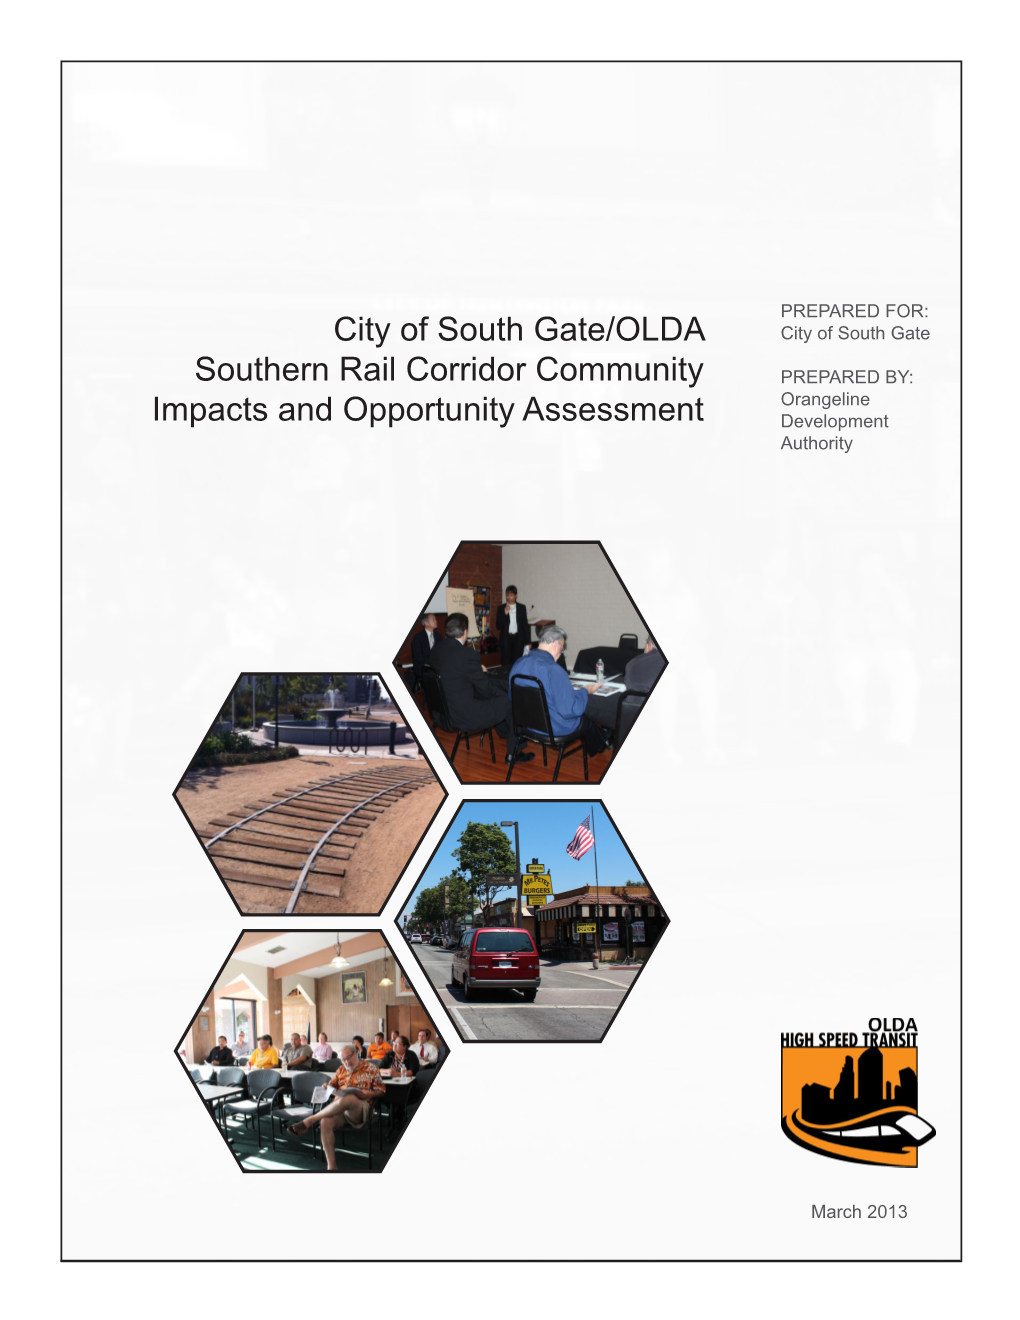 City of South Gate/OLDA Southern Rail Corridor Community Impacts and Opportunity Assessment Community Outreach Opportunities